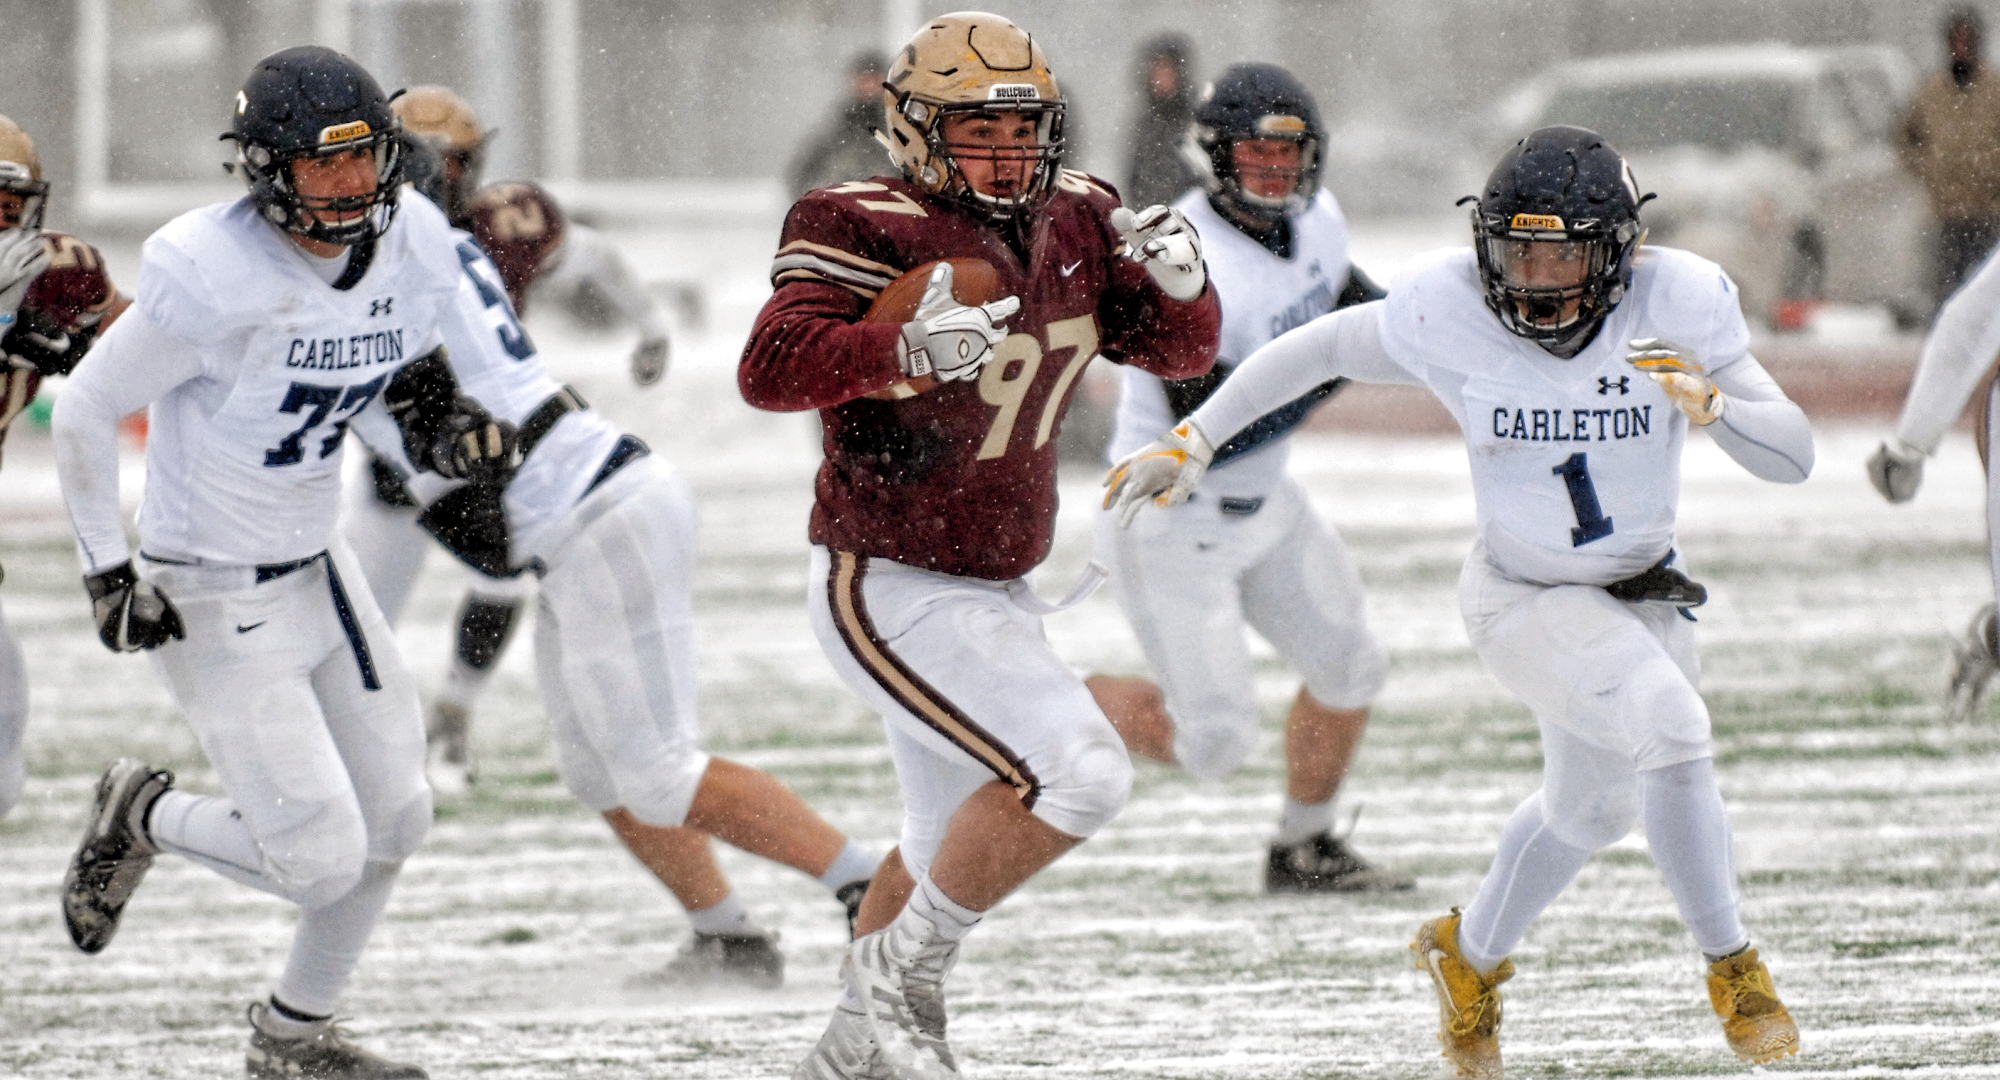 Senior Jesse Bucholz runs the ball after making an interception in the first quarter of the Cobbers' game with Carleton.